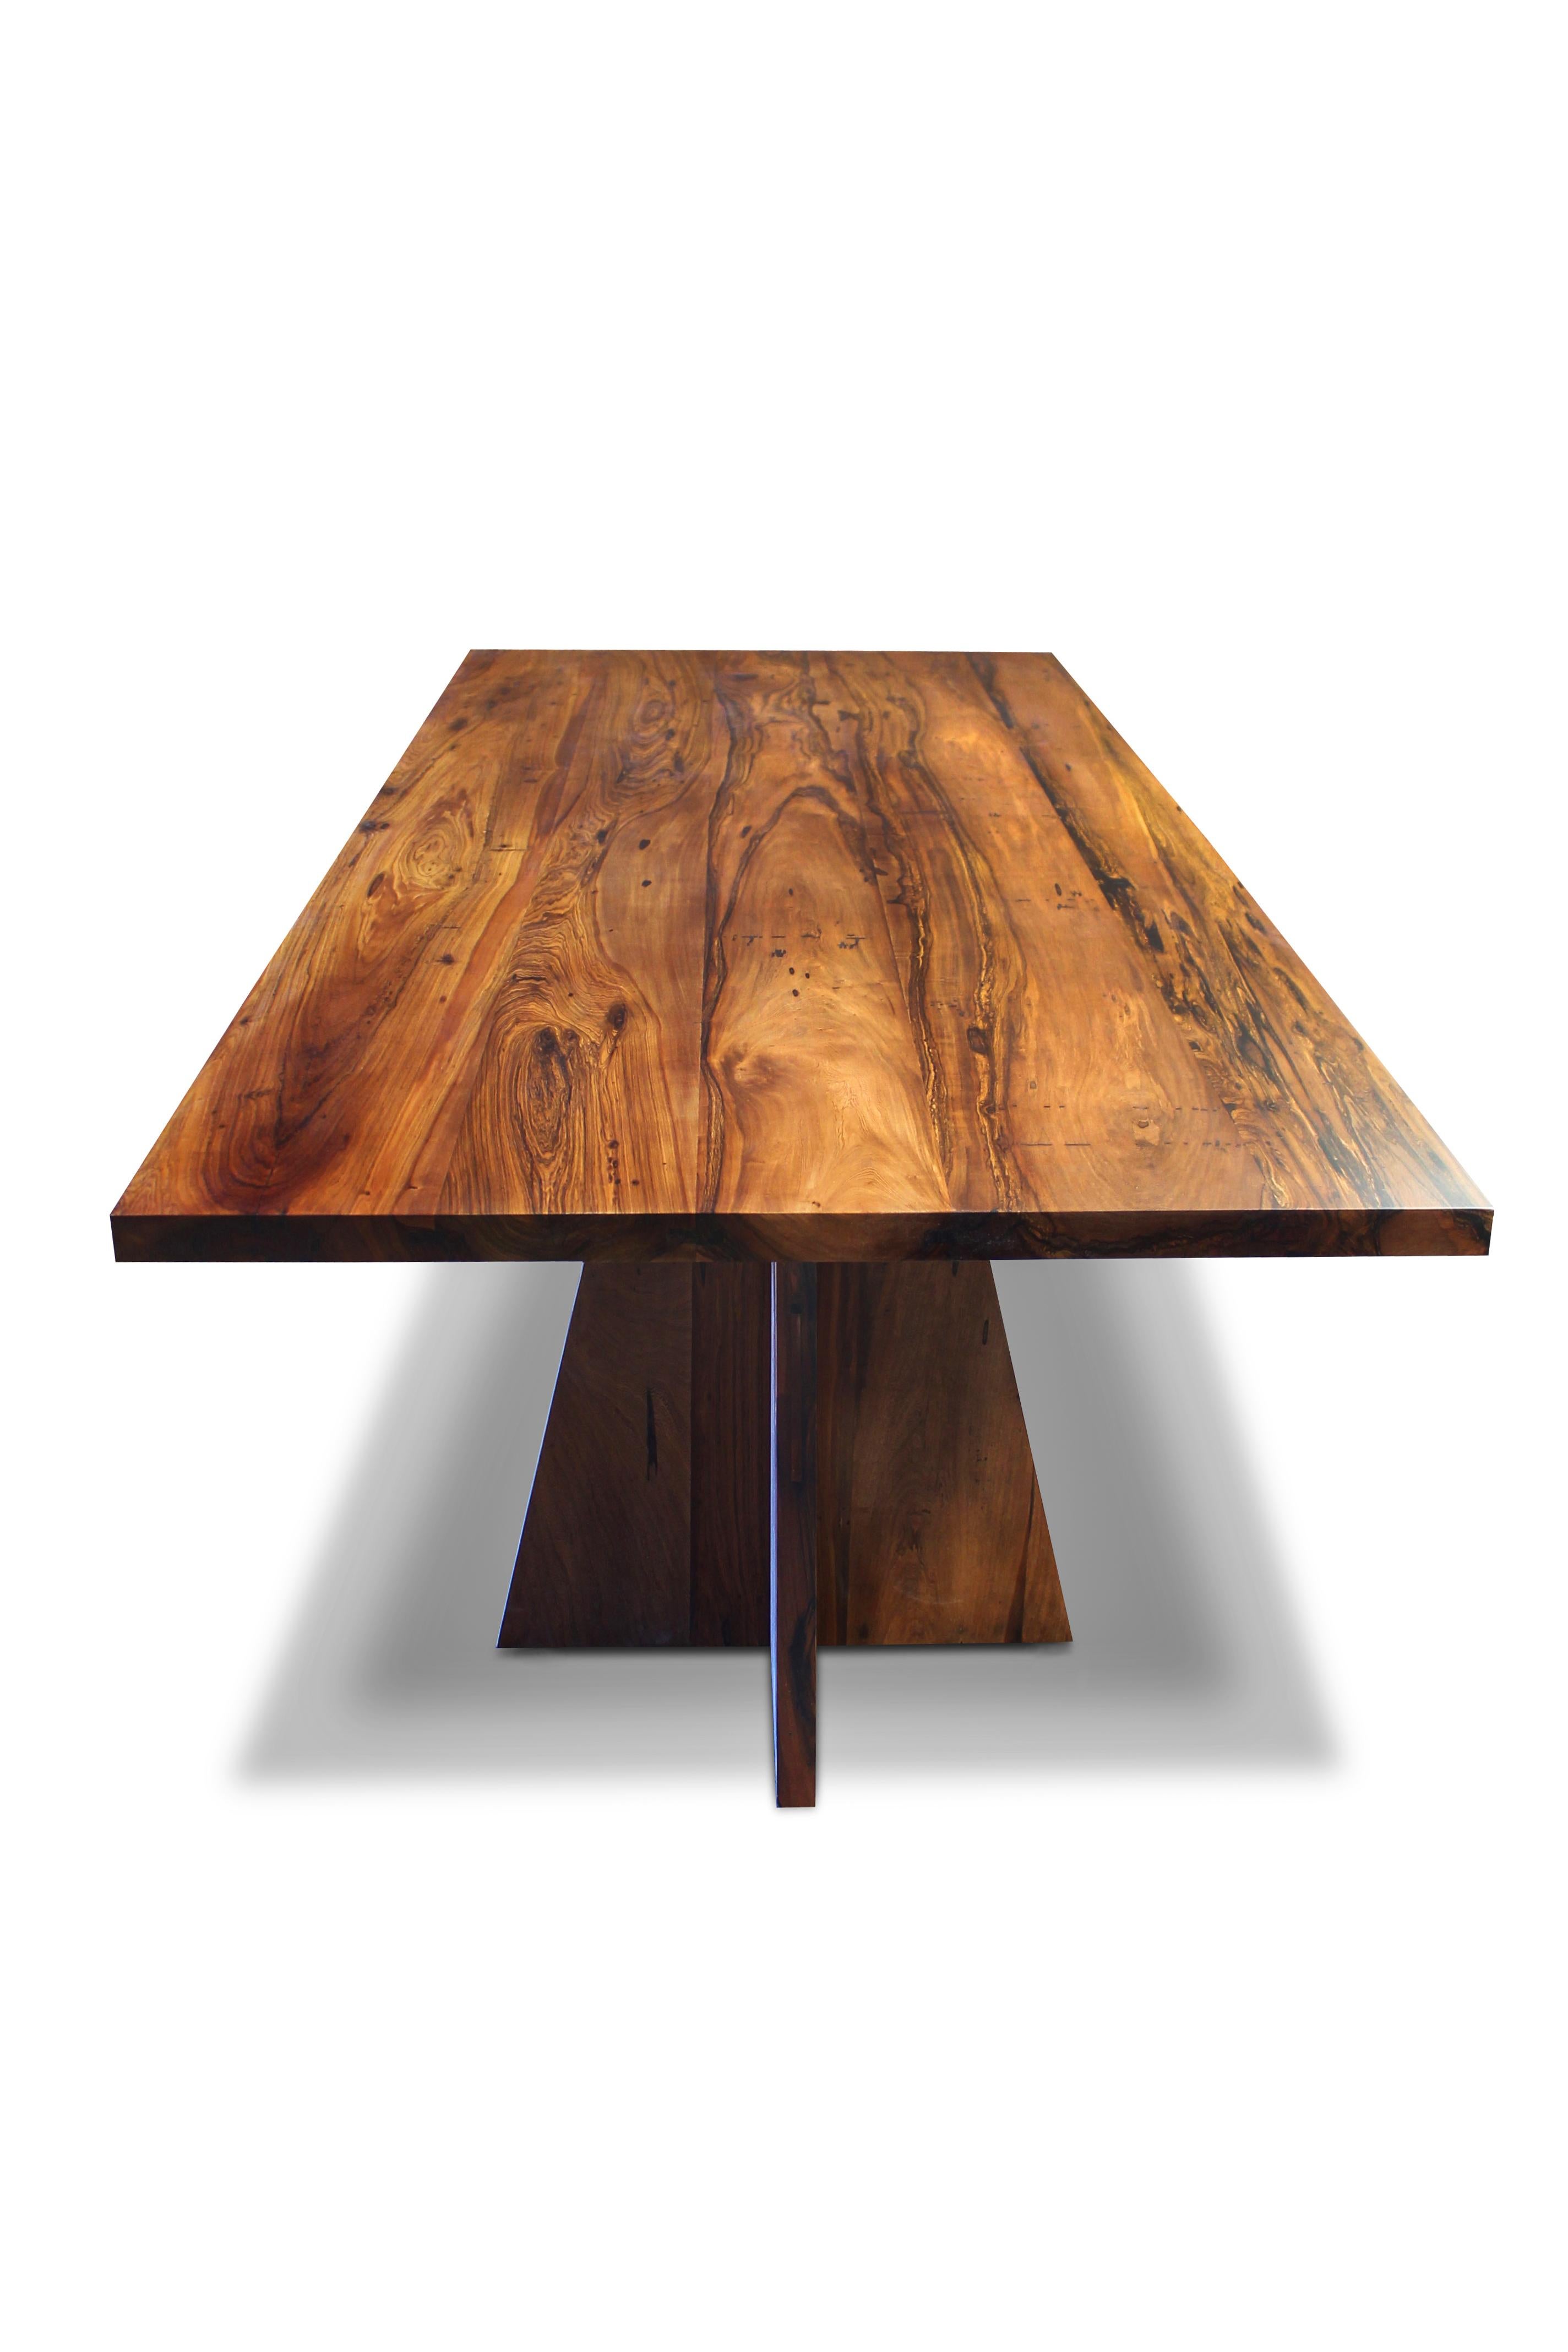 Solid Exotic Wood Twin Pedestal Modern Table, Luca

Measurements are 96